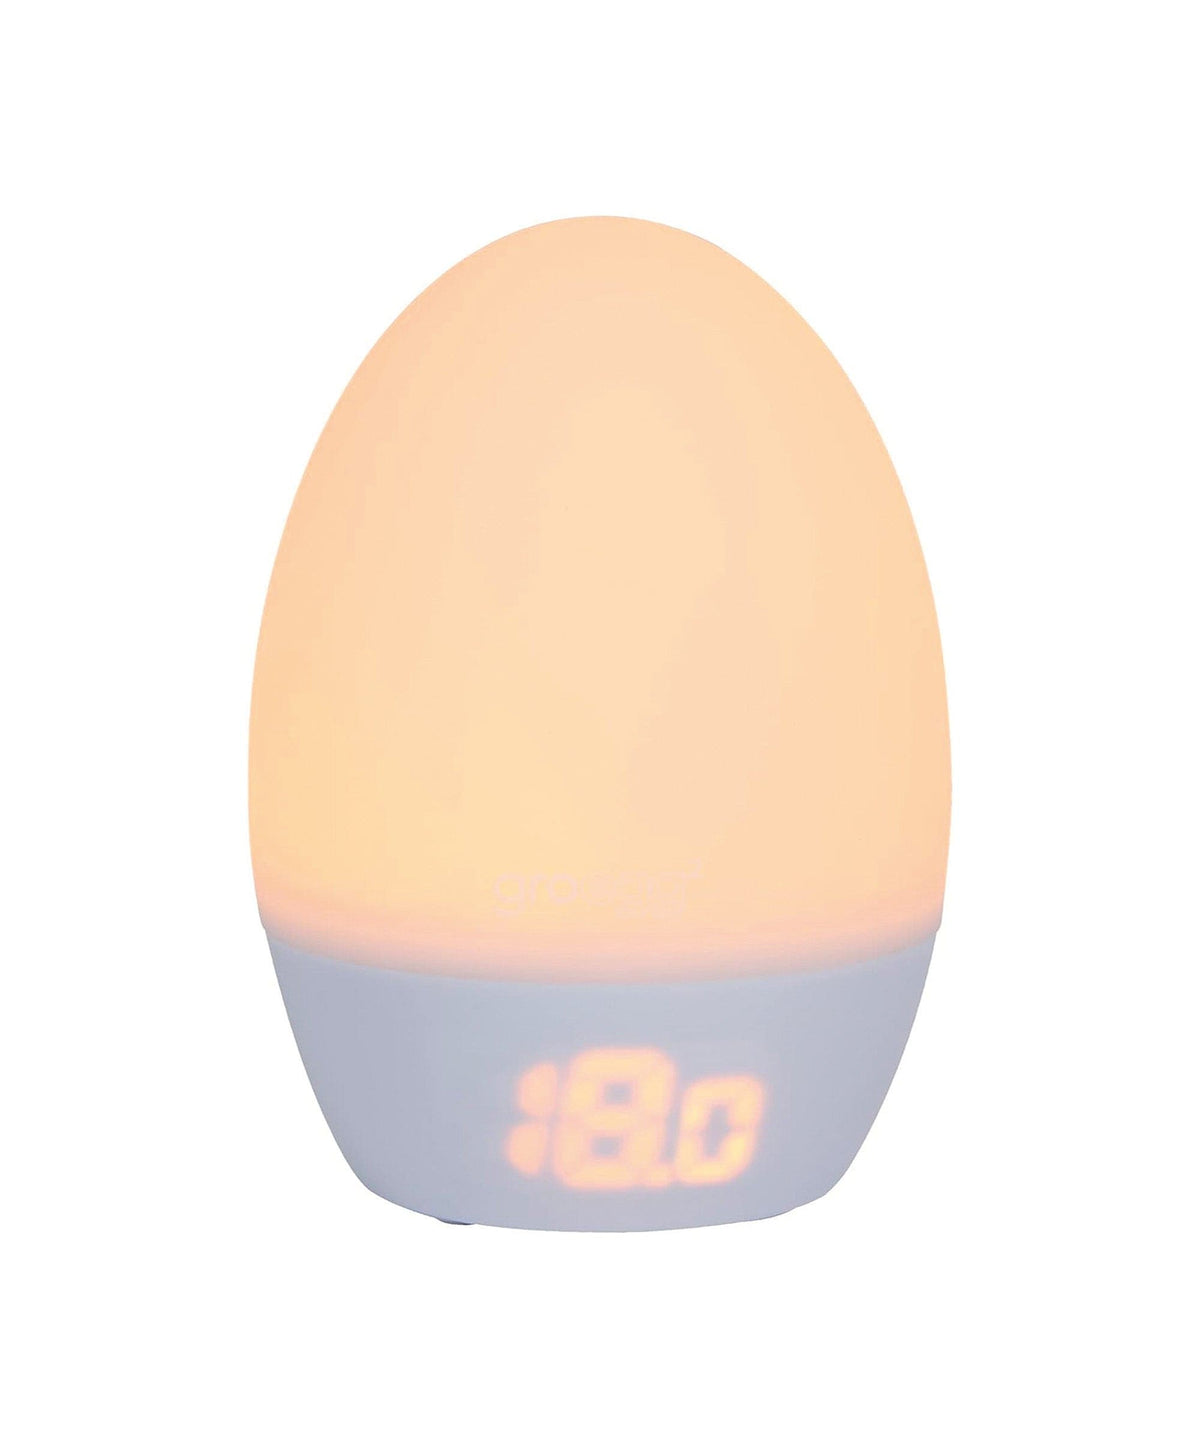 Groegg 1 Room Thermometer